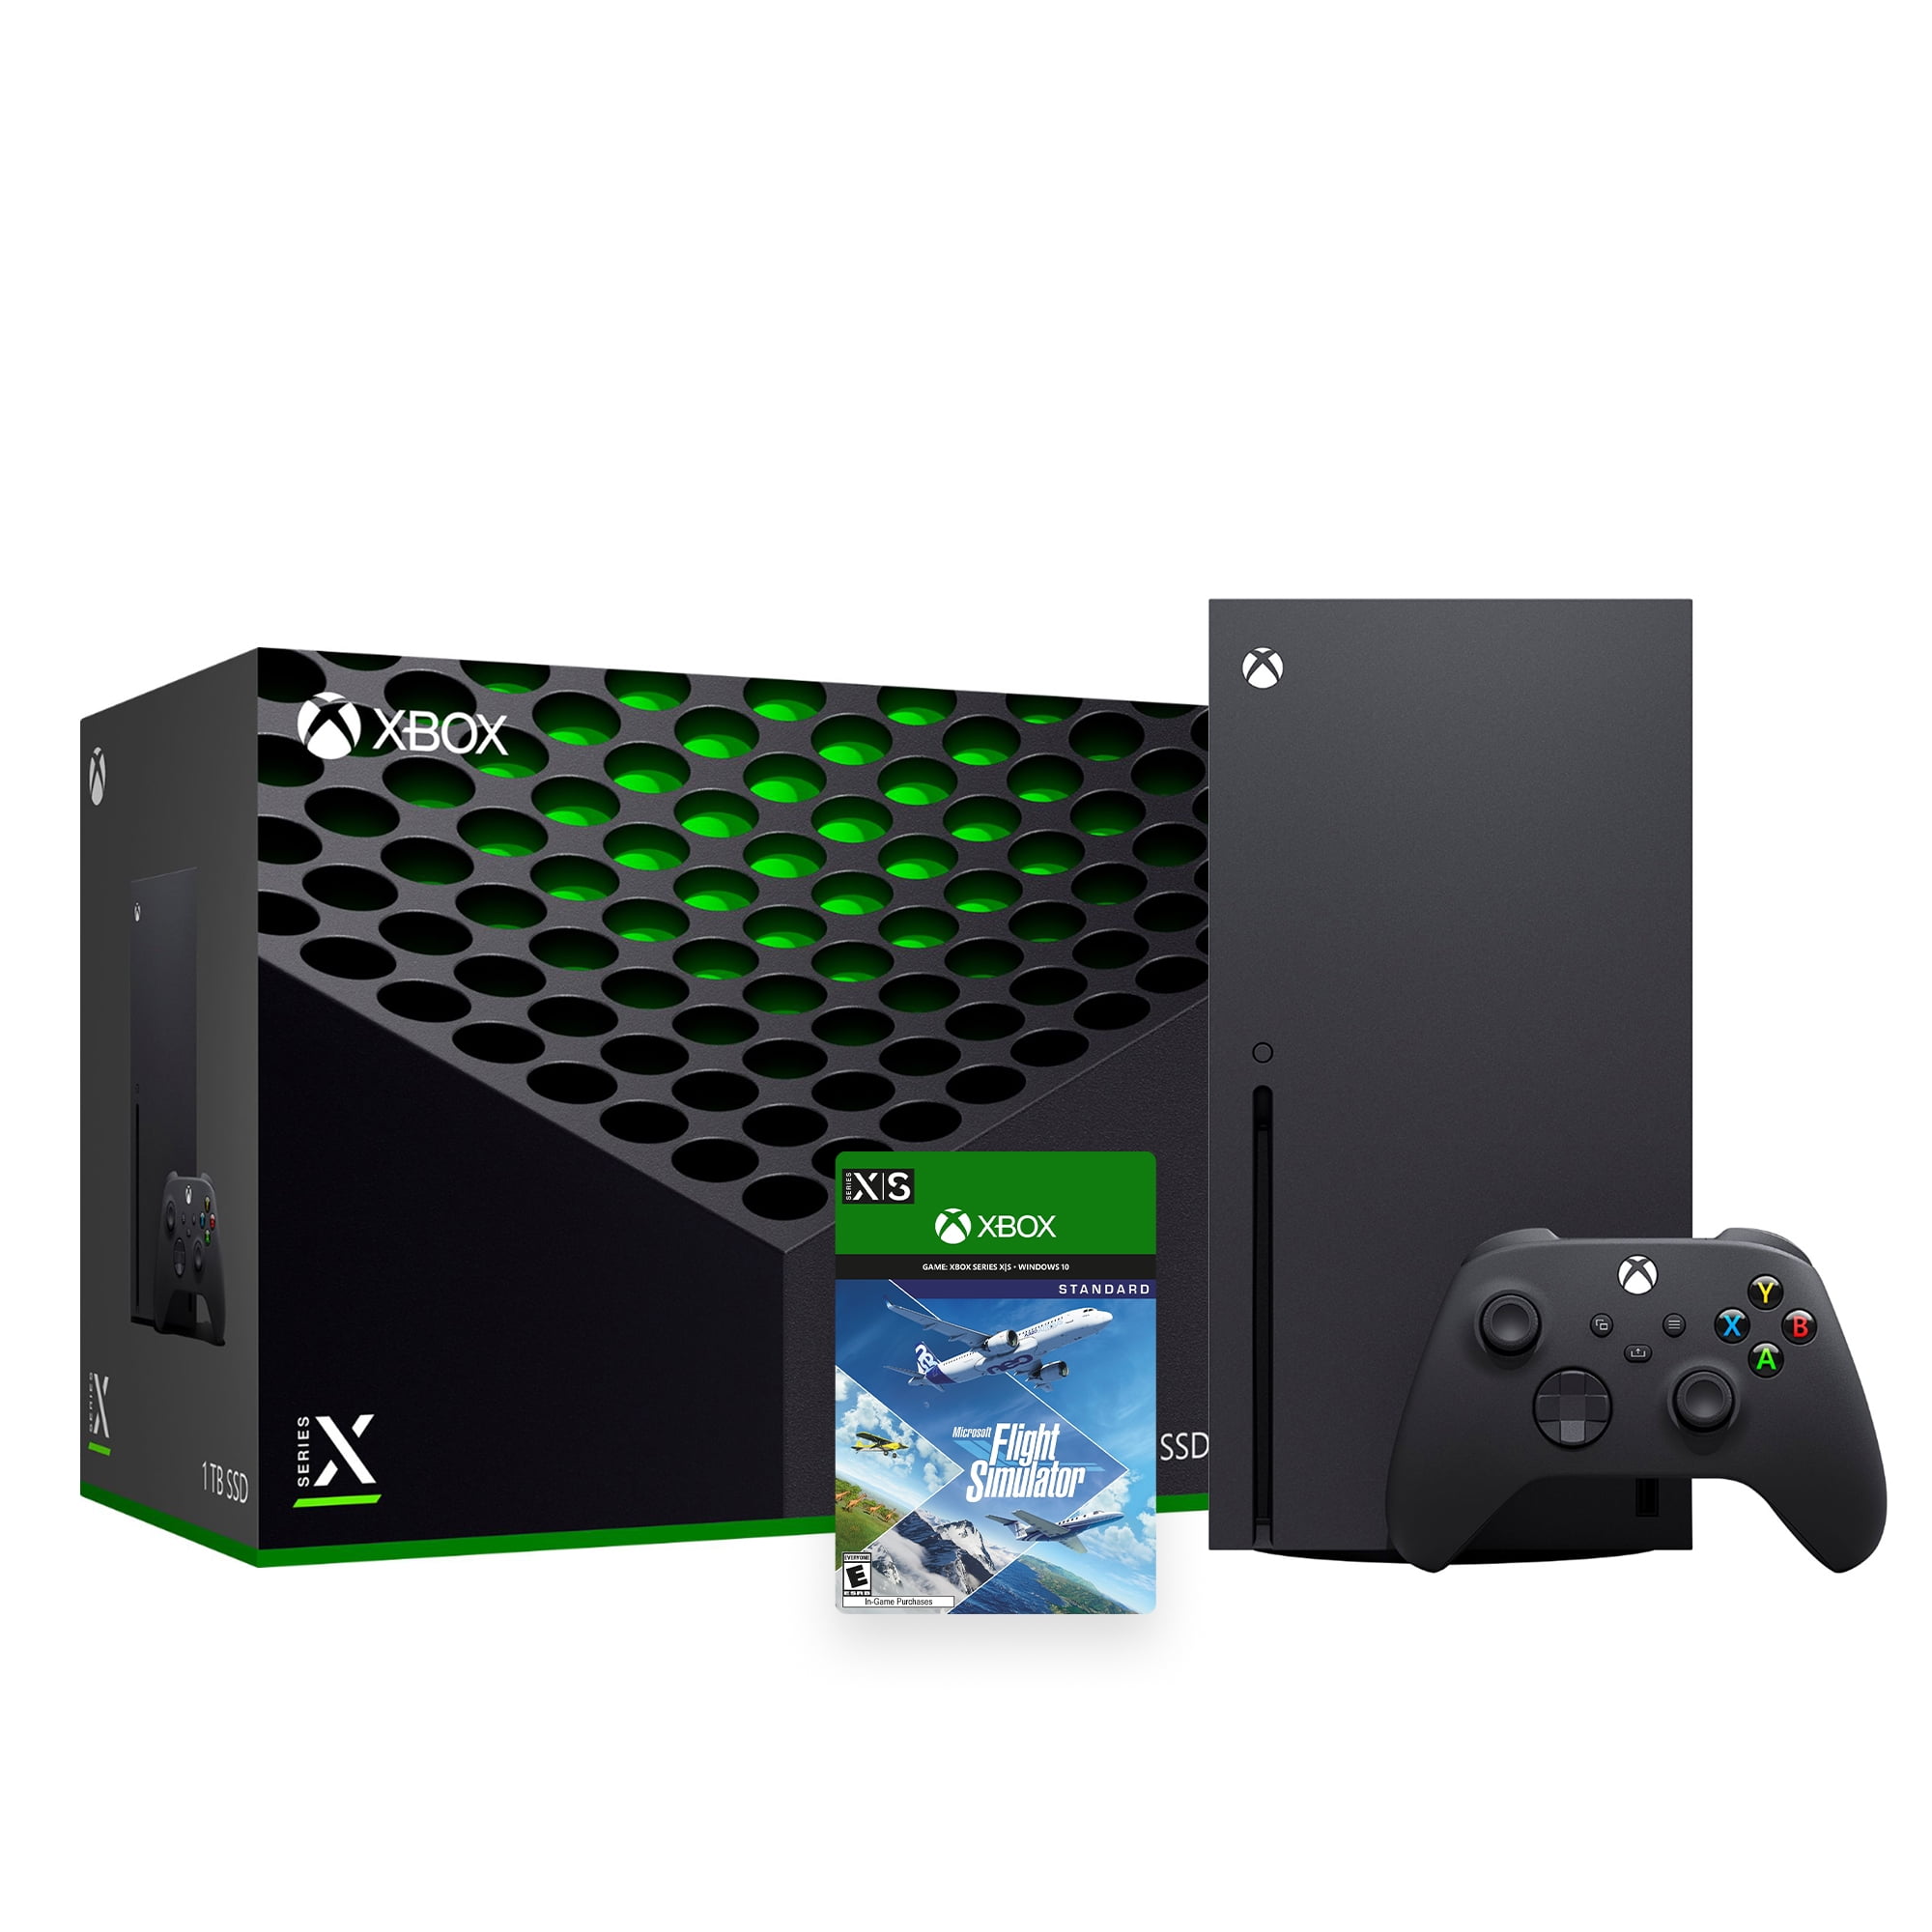 Microsoft Latest Xbox Series X Gaming Console Bundle - 1TB SSD Black Xbox  Console and Wireless Controller with Call of Duty Vanguard and Mytrix HDMI  ...